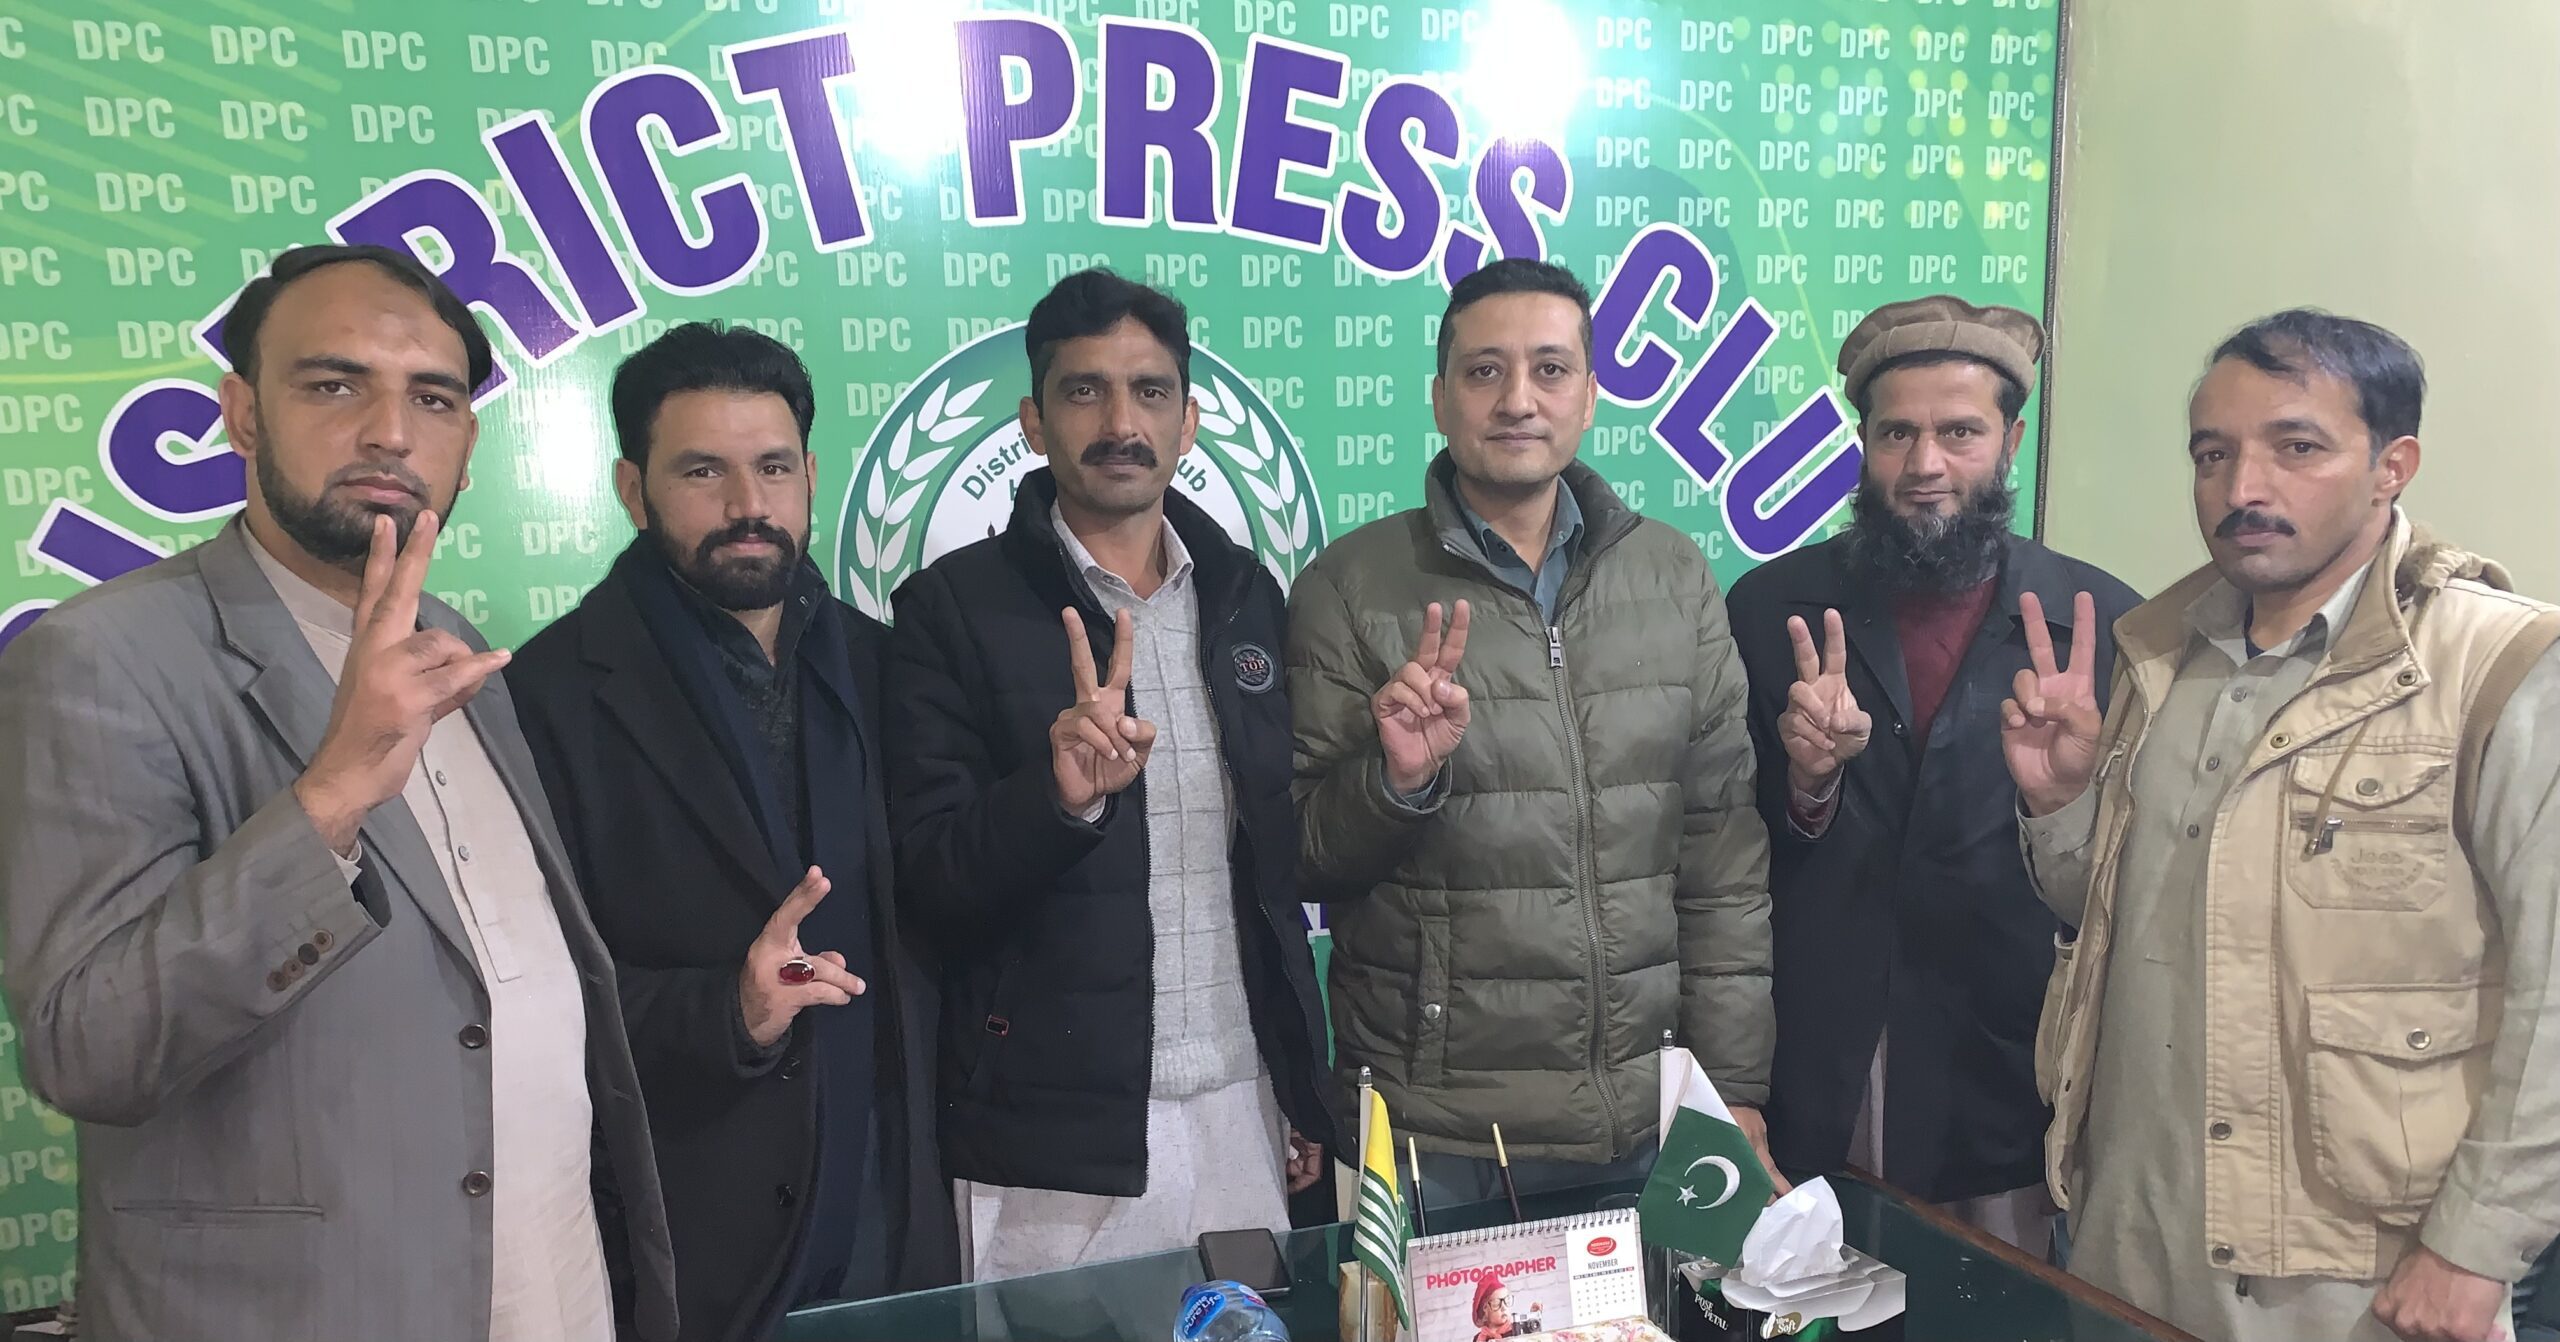 District Press Club registered Hattian Bala elections, the honorable court stopped the journalists panel from making rhetoric against the newly elected president of the pen panel, Ijaz Mir and other newly elected office bearers, media publicity - Chinar Kashmir News
